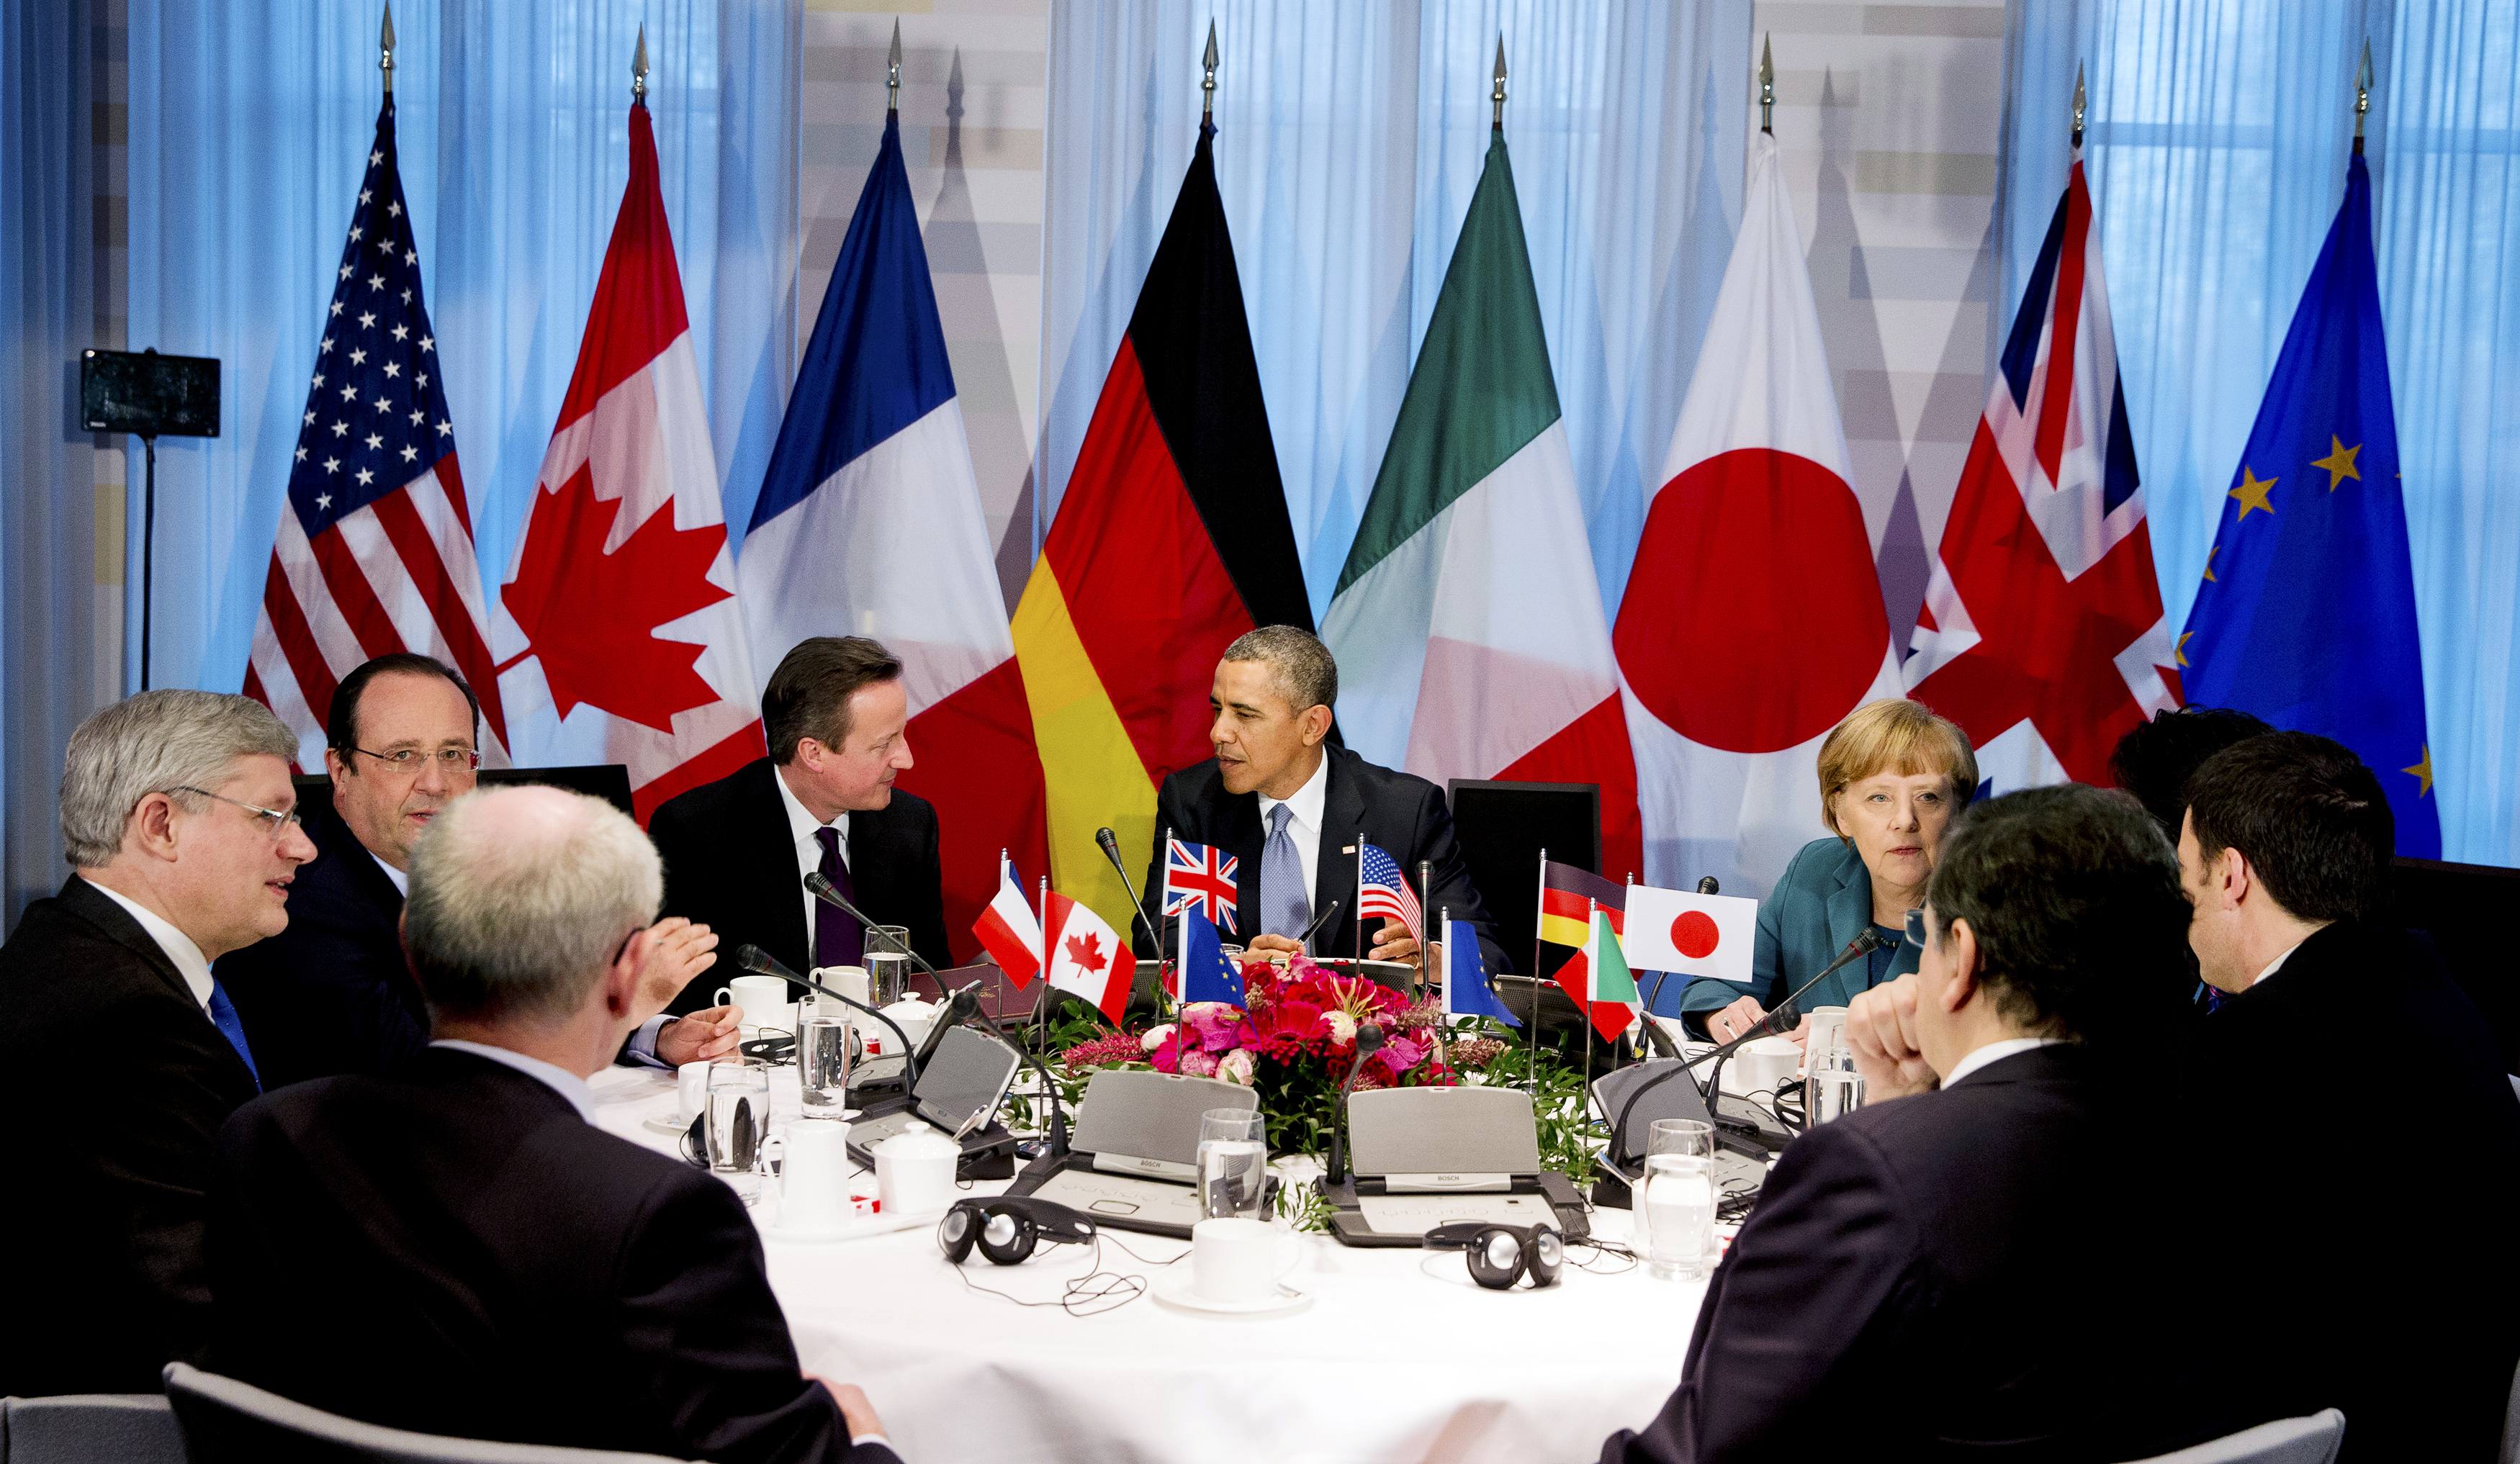 U.S. President Barack Obama (C) participates in a G7 leaders meeting during the Nuclear Security Summit in The Hague March 24, 2014. At the table are the President of the European Council Herman Van Rompuy, French President Francois Hollande, British Prime Minister David Cameron, Obama, German Chancellor Angela Merkel, Japanese Prime Minister Shinzo Abe, Italy's Prime Minister Matteo Renzi and President of the European Commission Jose Manuel Barroso. (L-R, clockwise). REUTERS/Jerry Lampen/Pool (NETHERLANDS - Tags: POLITICS)